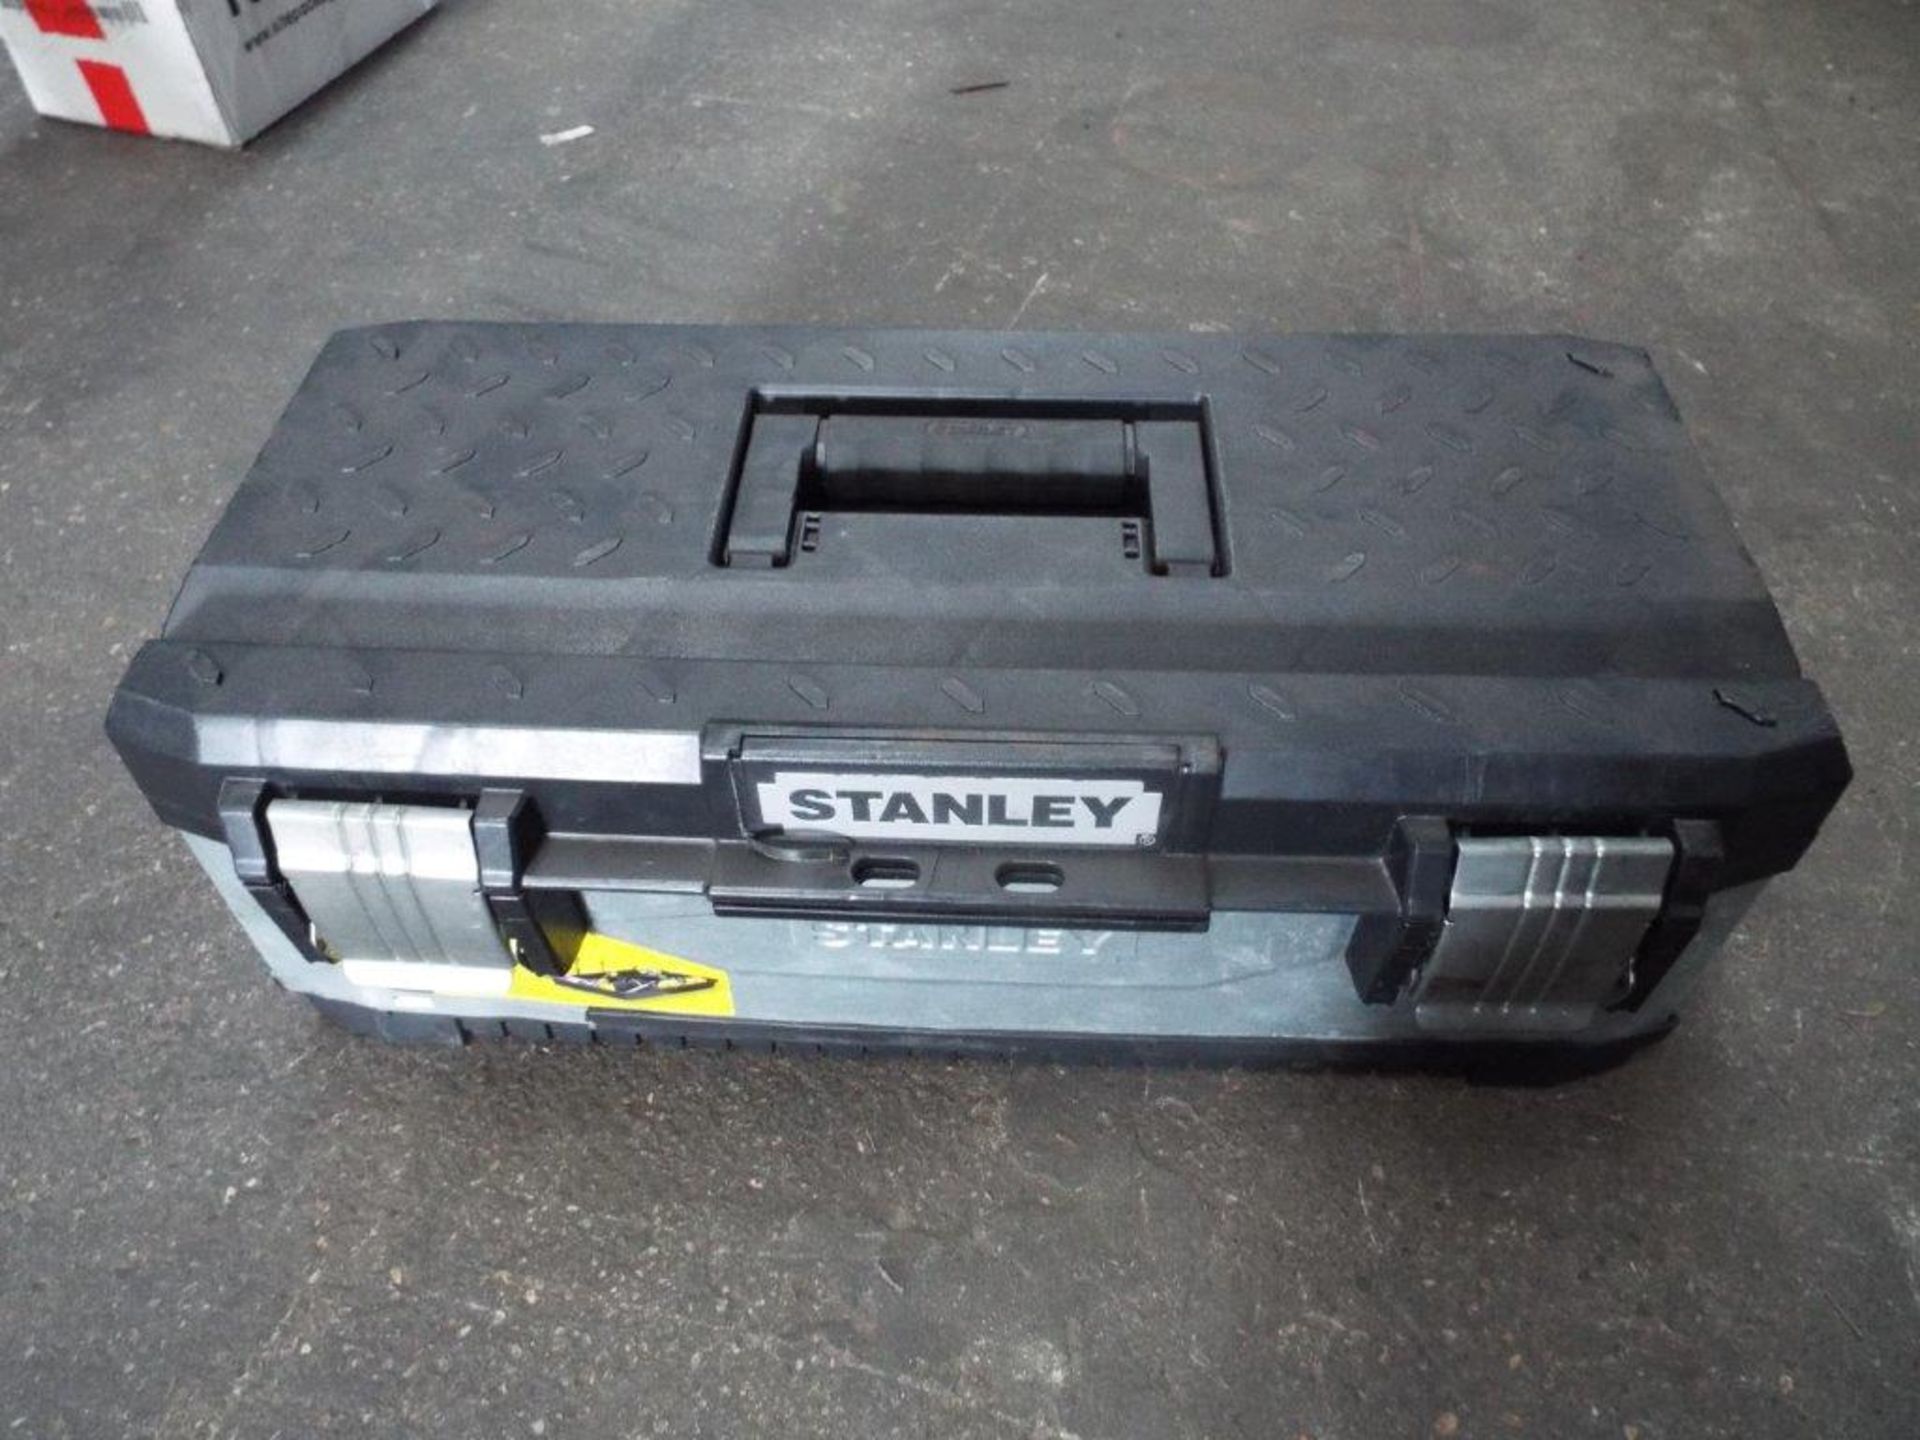 Stanley 23" Tool Box Complete with a Selection of Tools - Image 5 of 6